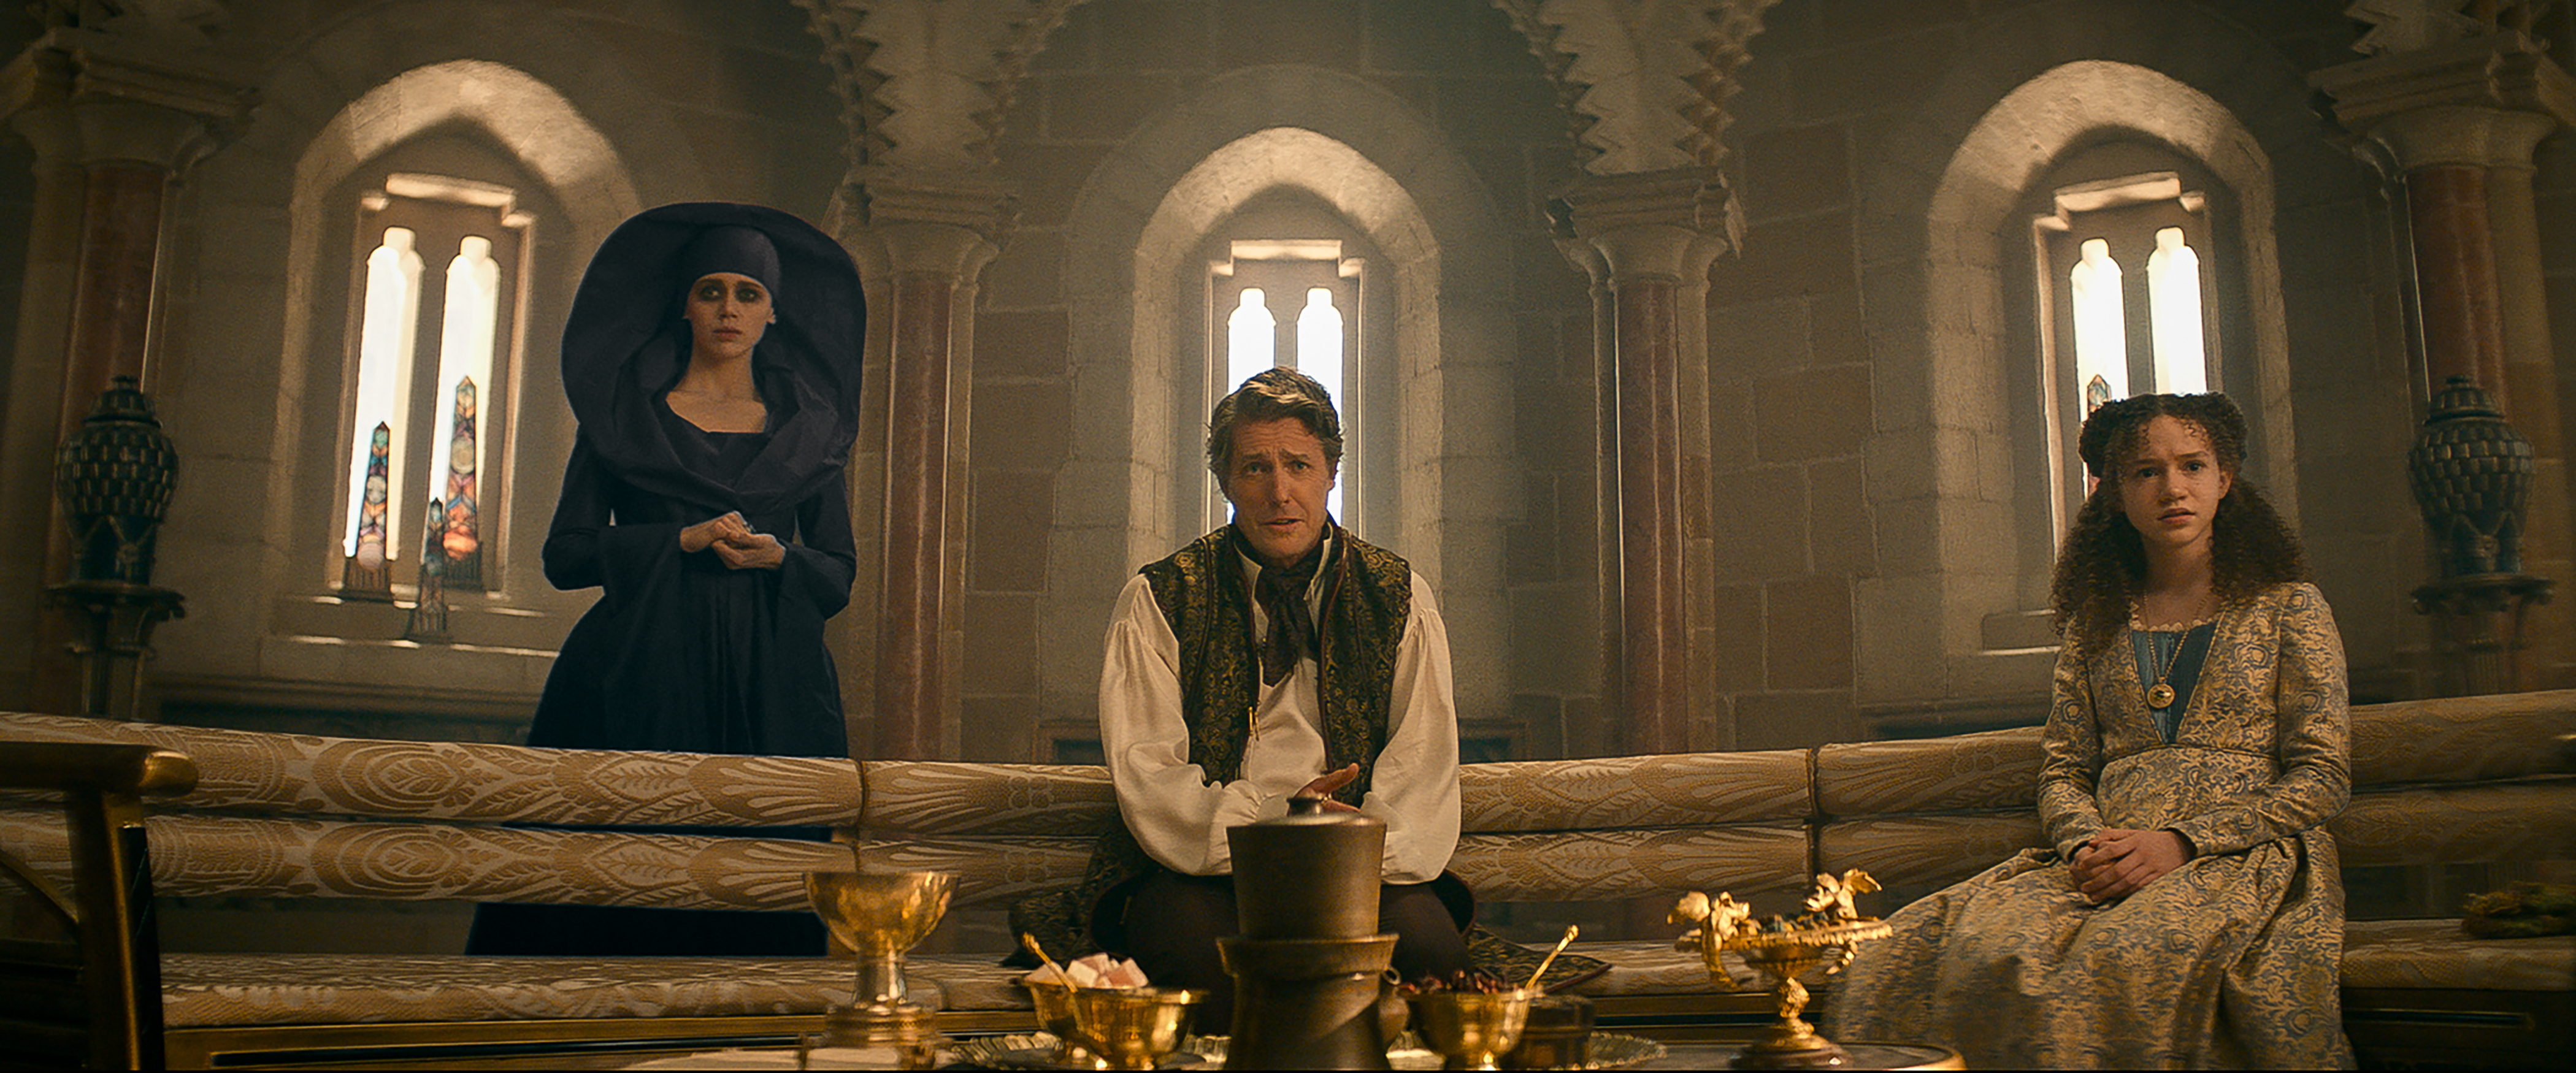 Daisy Head plays Sofina, Hugh Grant plays Forge and Chloe Coleman plays Kira in 'Dungeons & Dragons: Honor Among Thieves'. Image: Paramount Pictures / eOne / Supplied